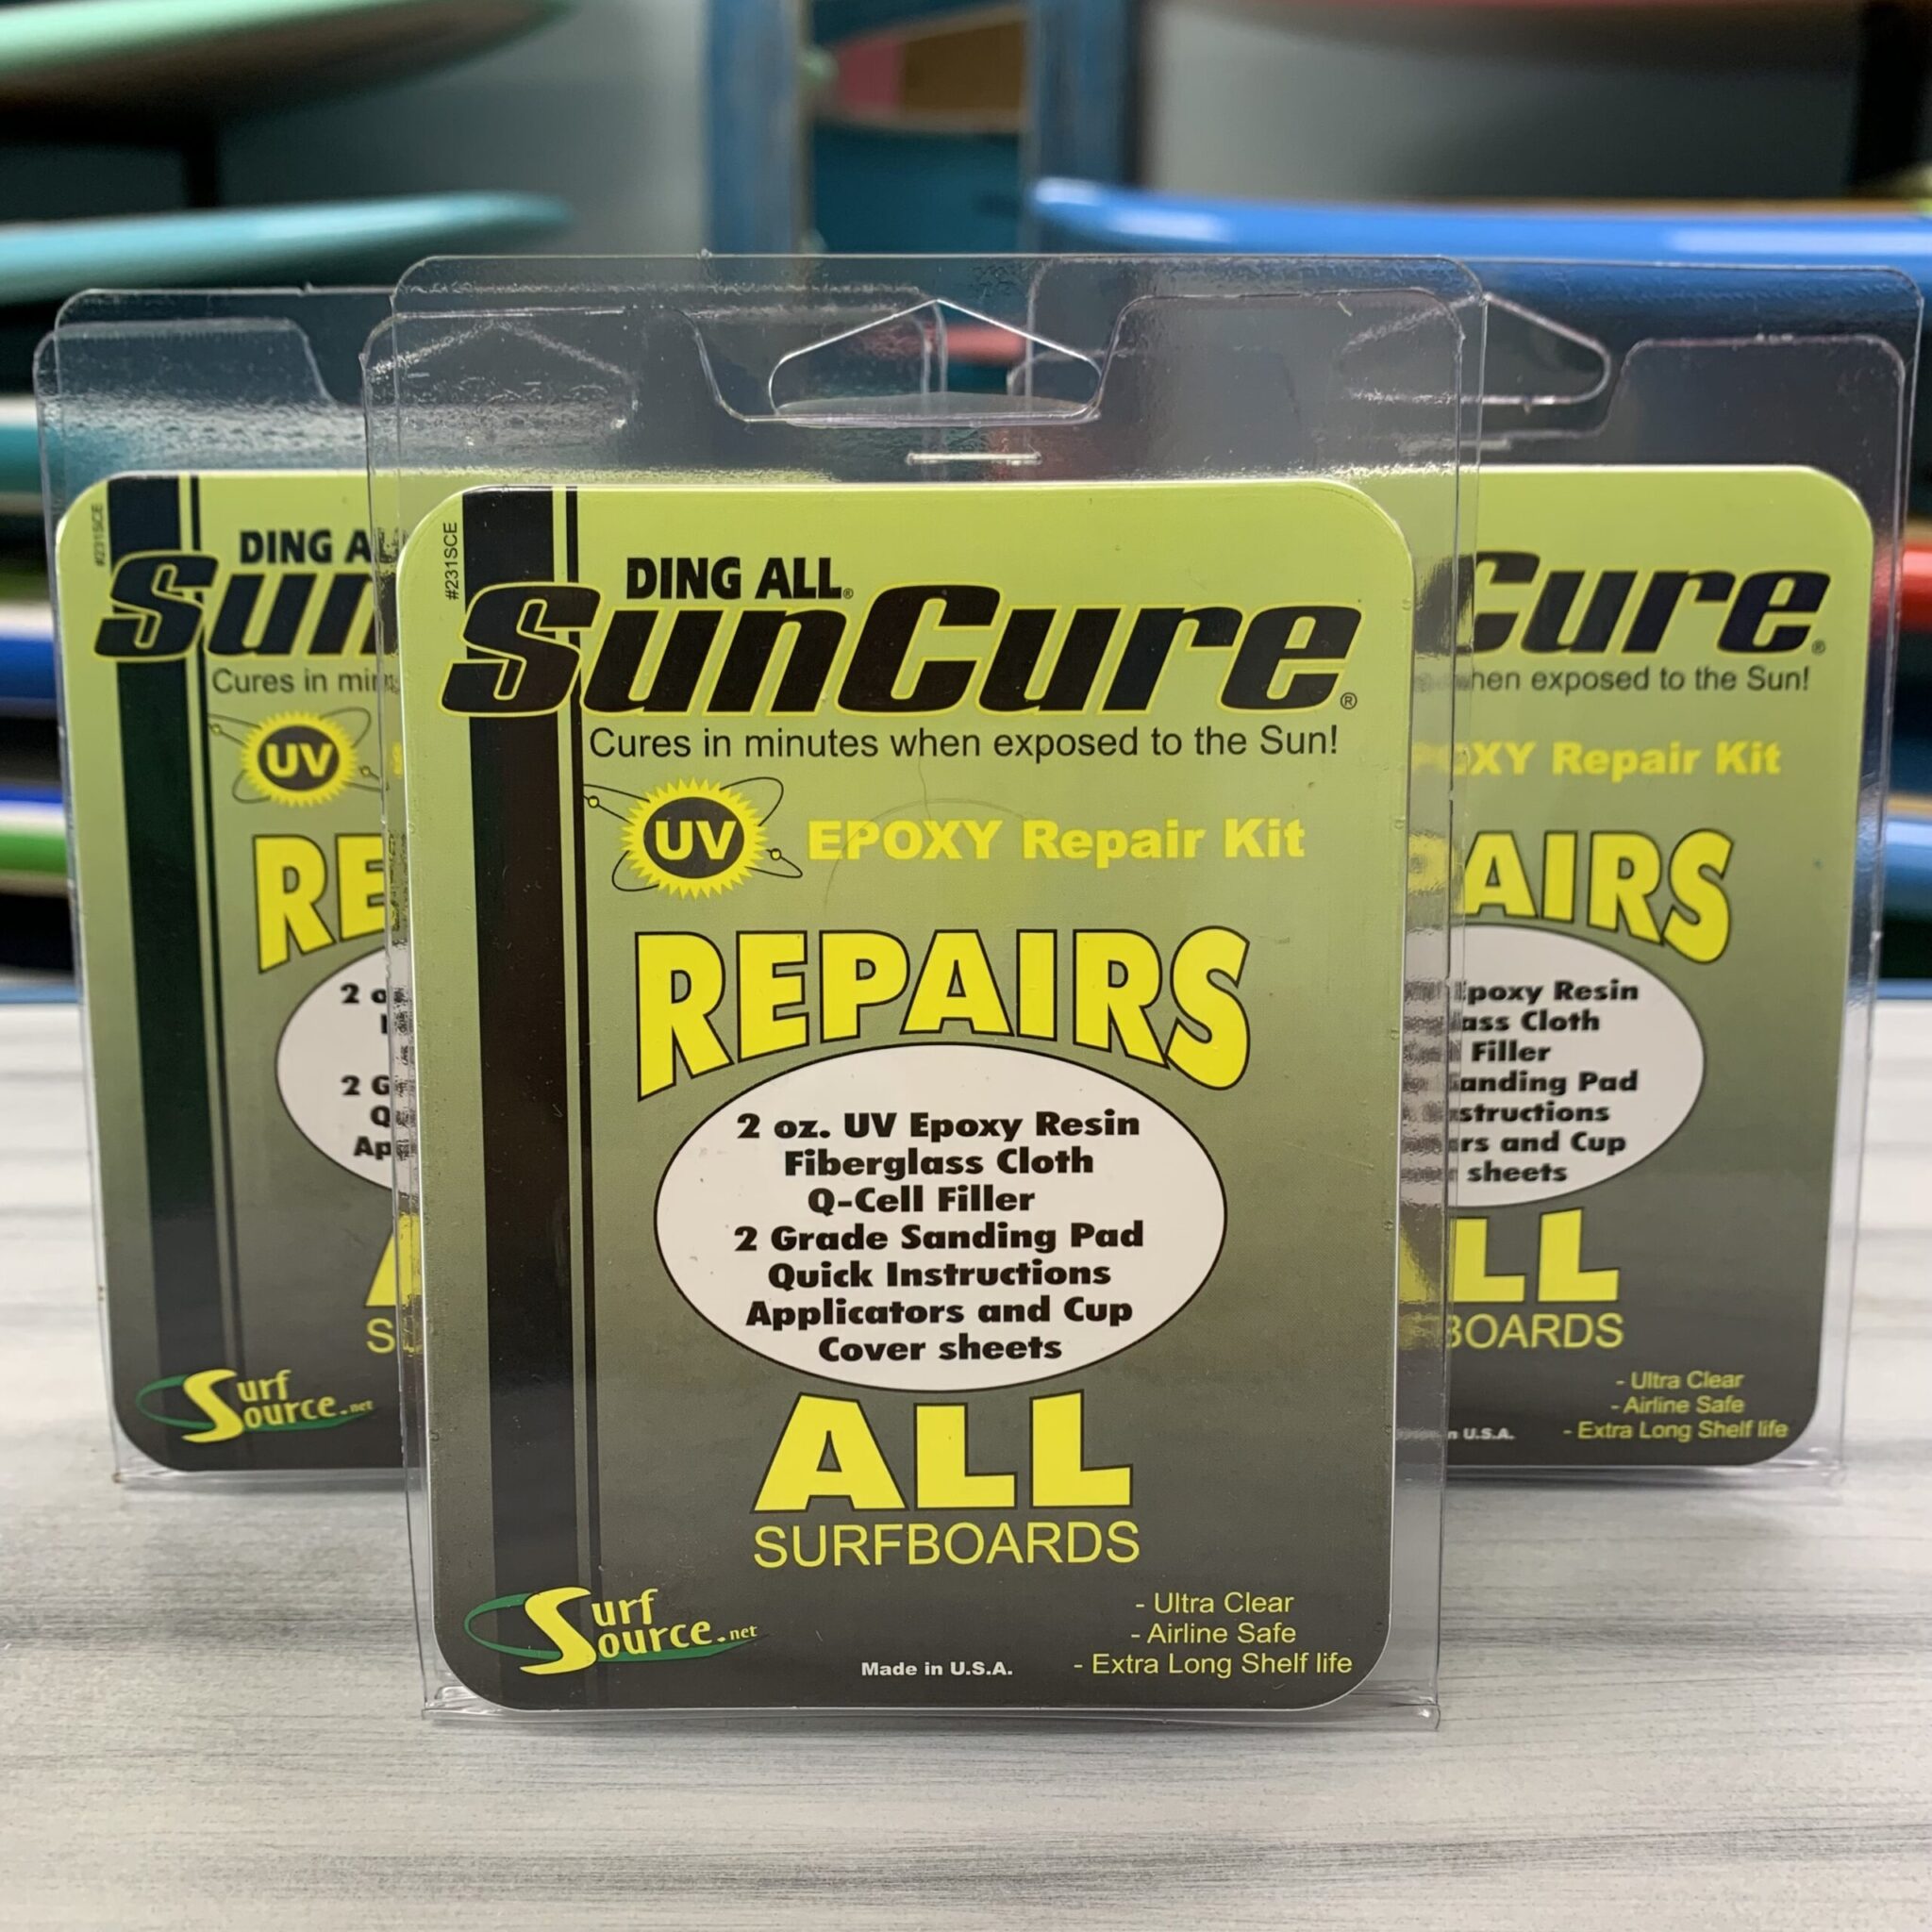 UV Cure Ding Repair Kit With Catalyst